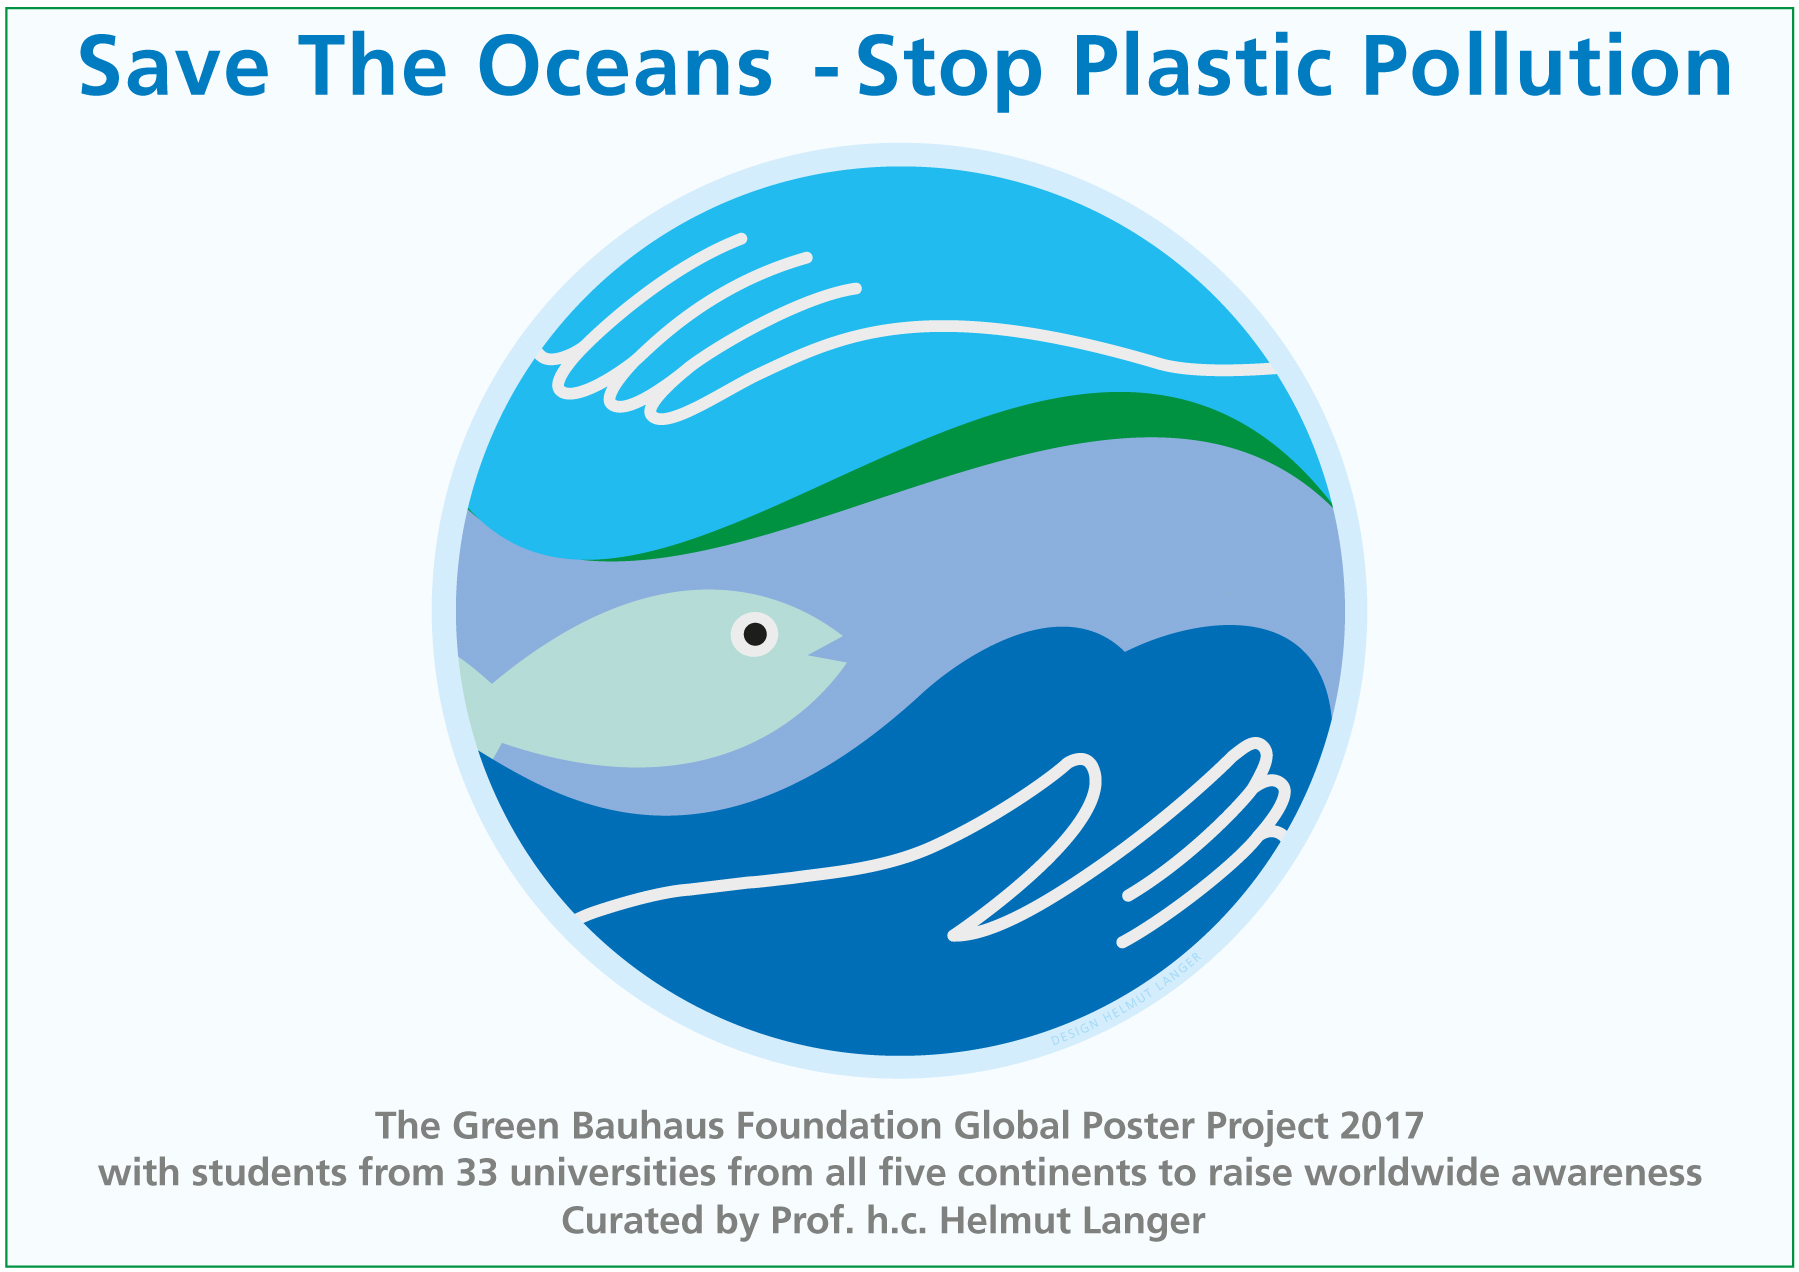 SAVE THE OCEANS Stop Plastic pollution - The International Design Co-operation  with 35 universities from all five continents